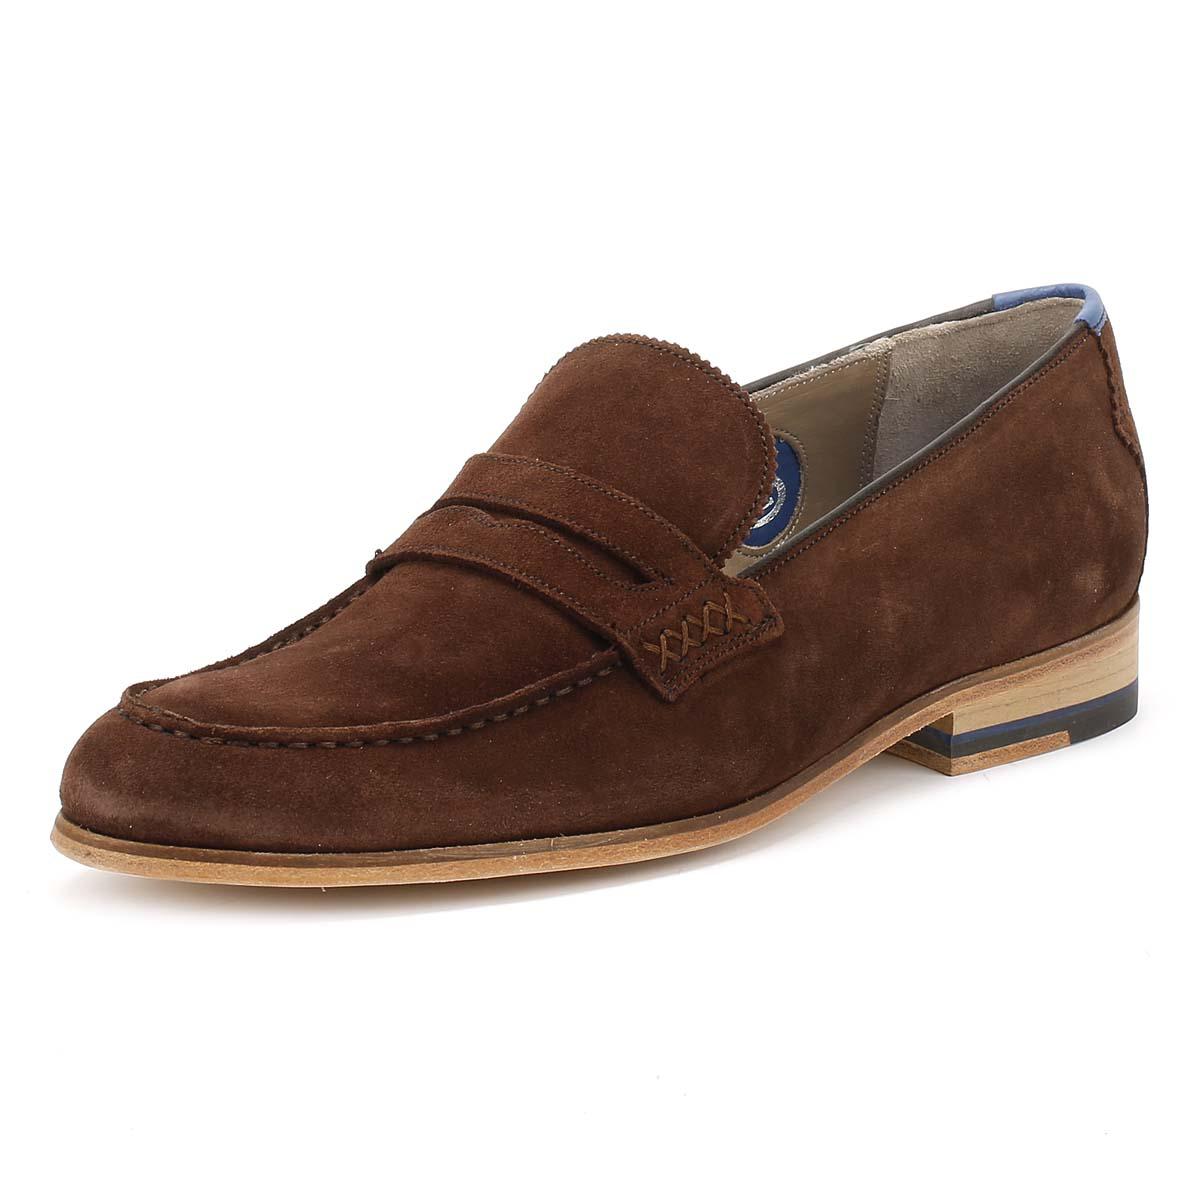 Oliver Sweeney Suede Longbridge Penny Loafer Shoes in Chocolate (Brown ...